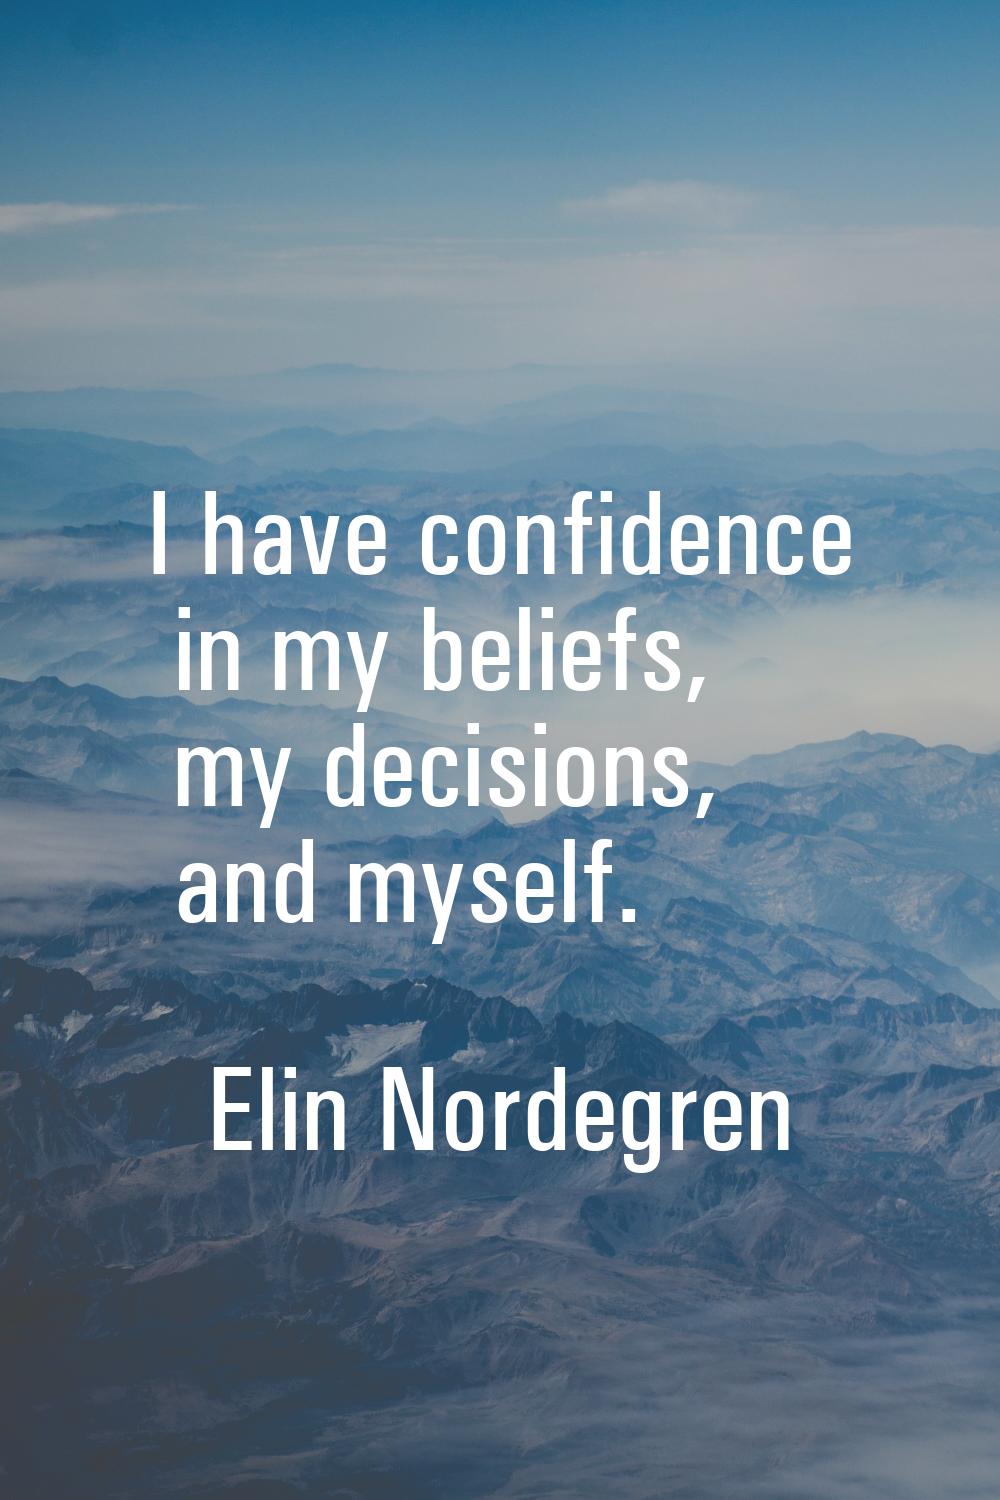 I have confidence in my beliefs, my decisions, and myself.